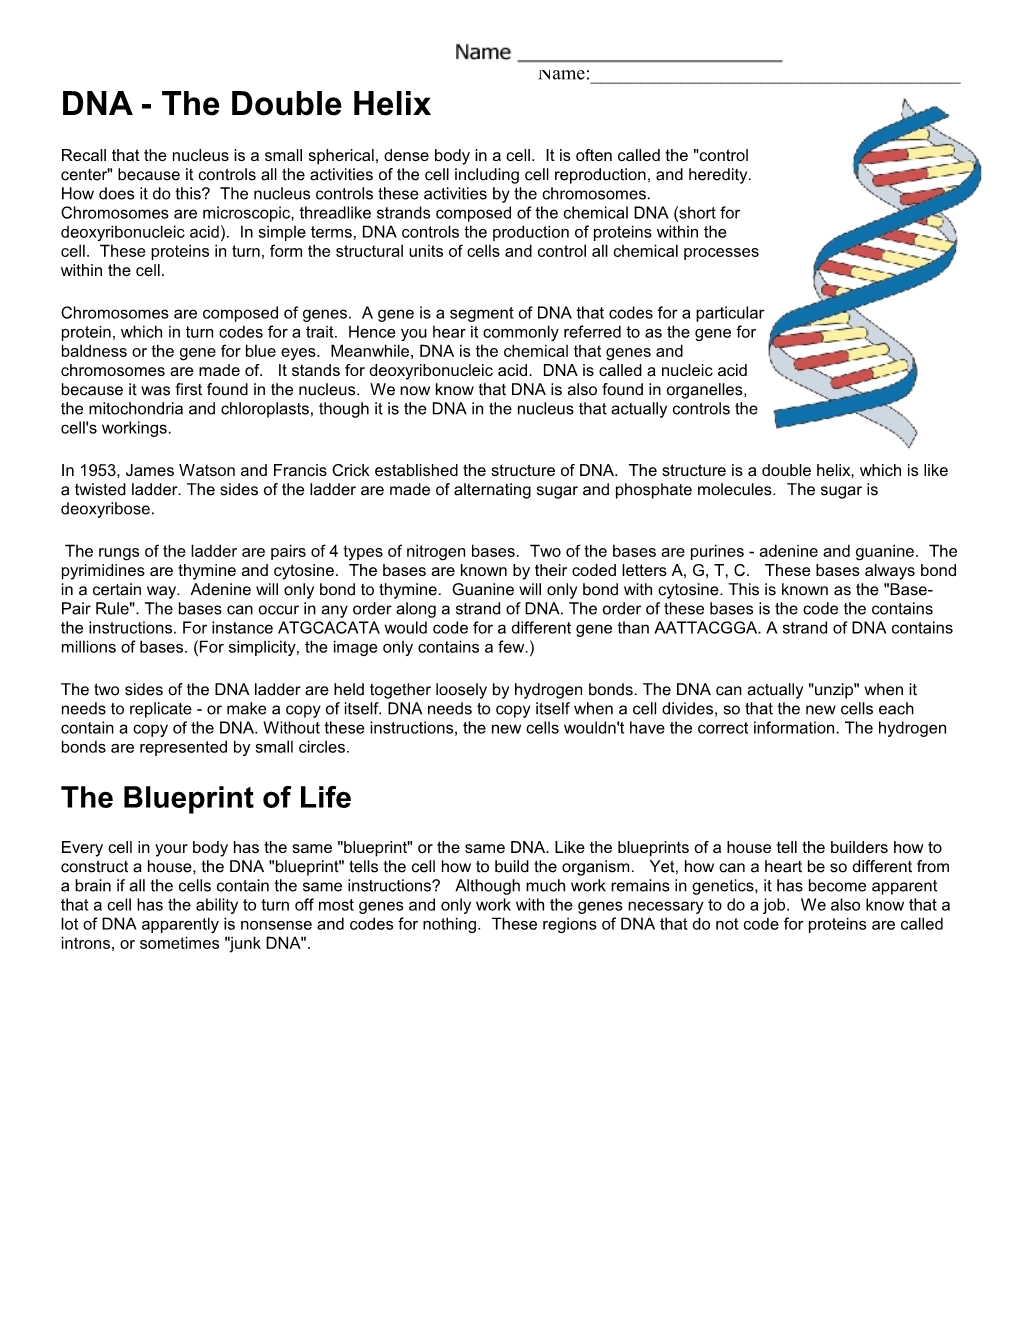 DNA - the Double Helix